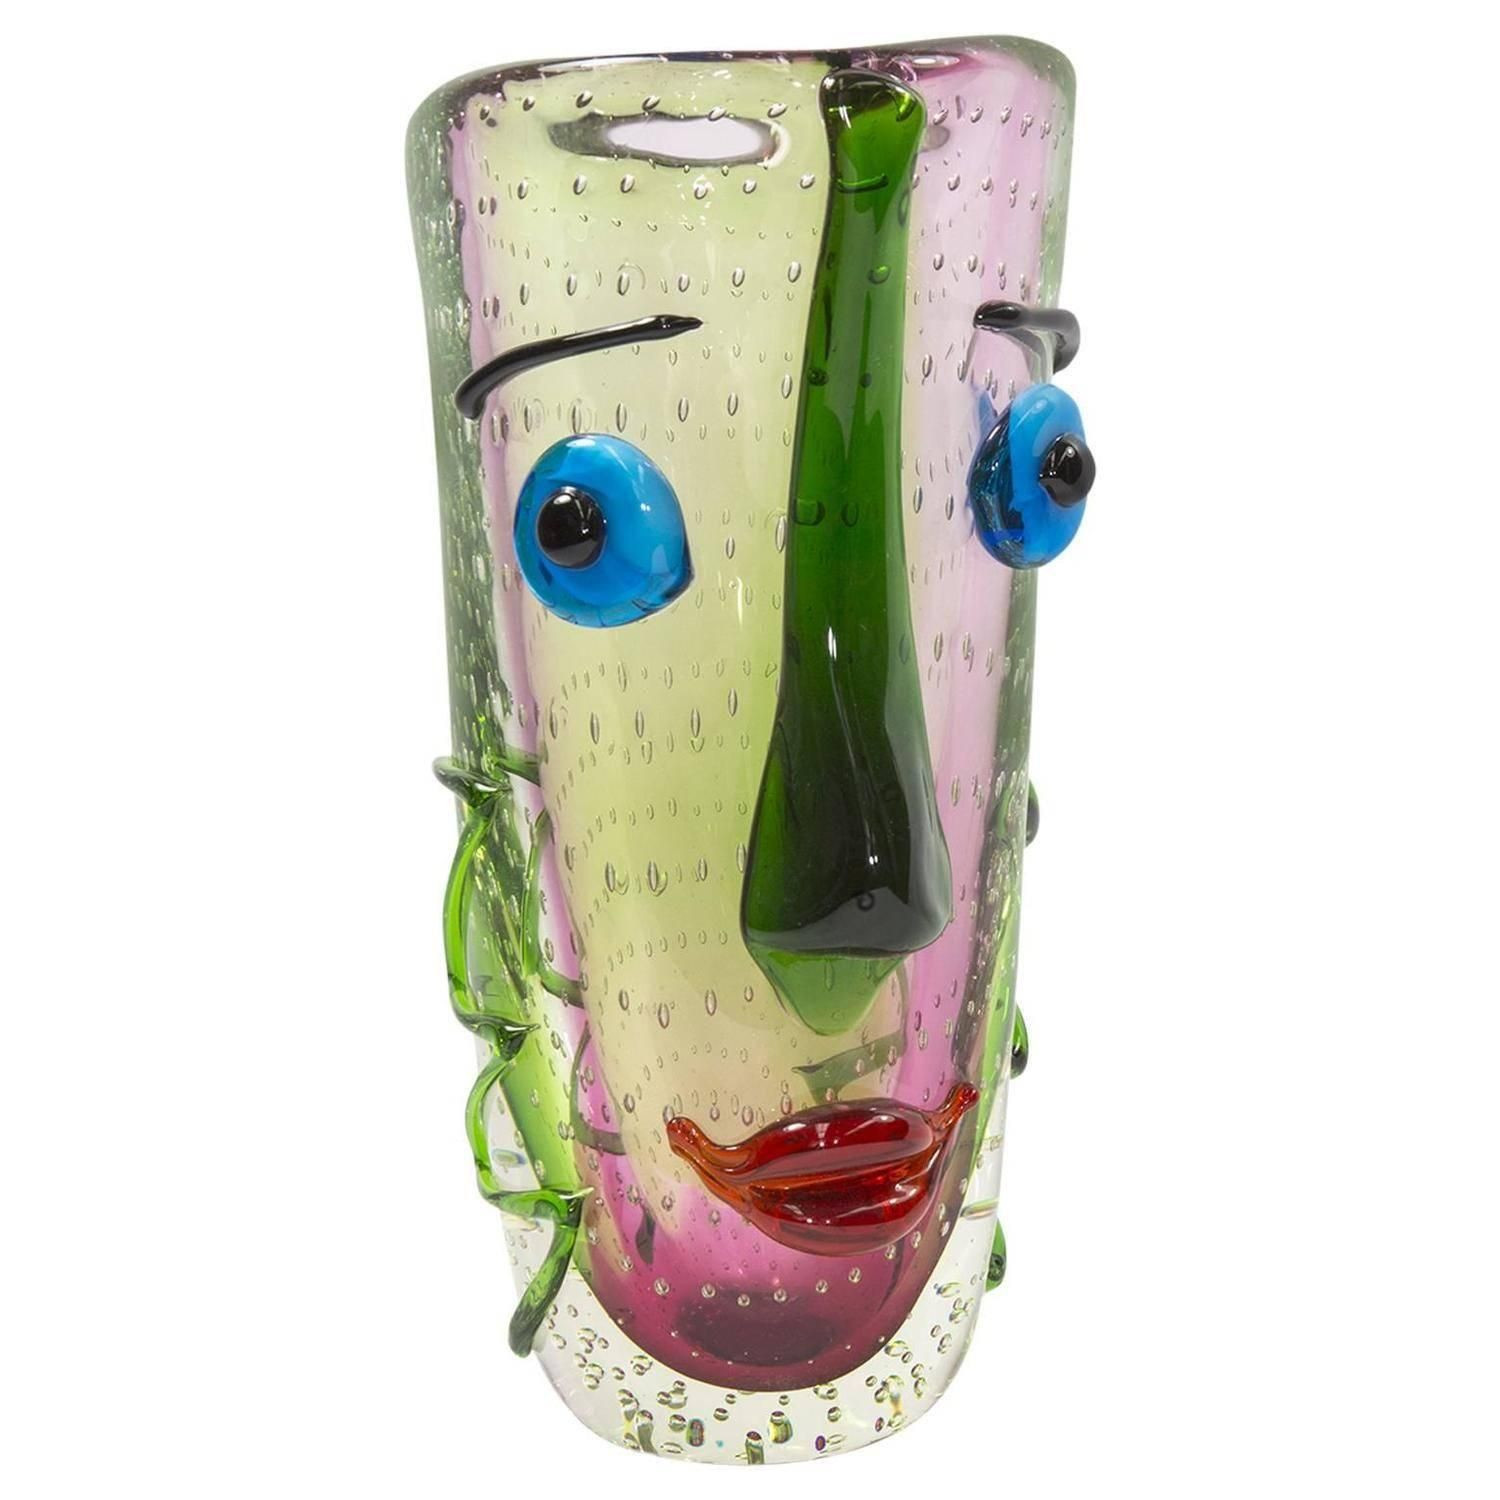 23 Awesome Green Glass Vases for Sale 2024 free download green glass vases for sale of fabulous large murano multicolored abstract picasso face art glass for fabulous large murano multicolored abstract picasso face art glass vase